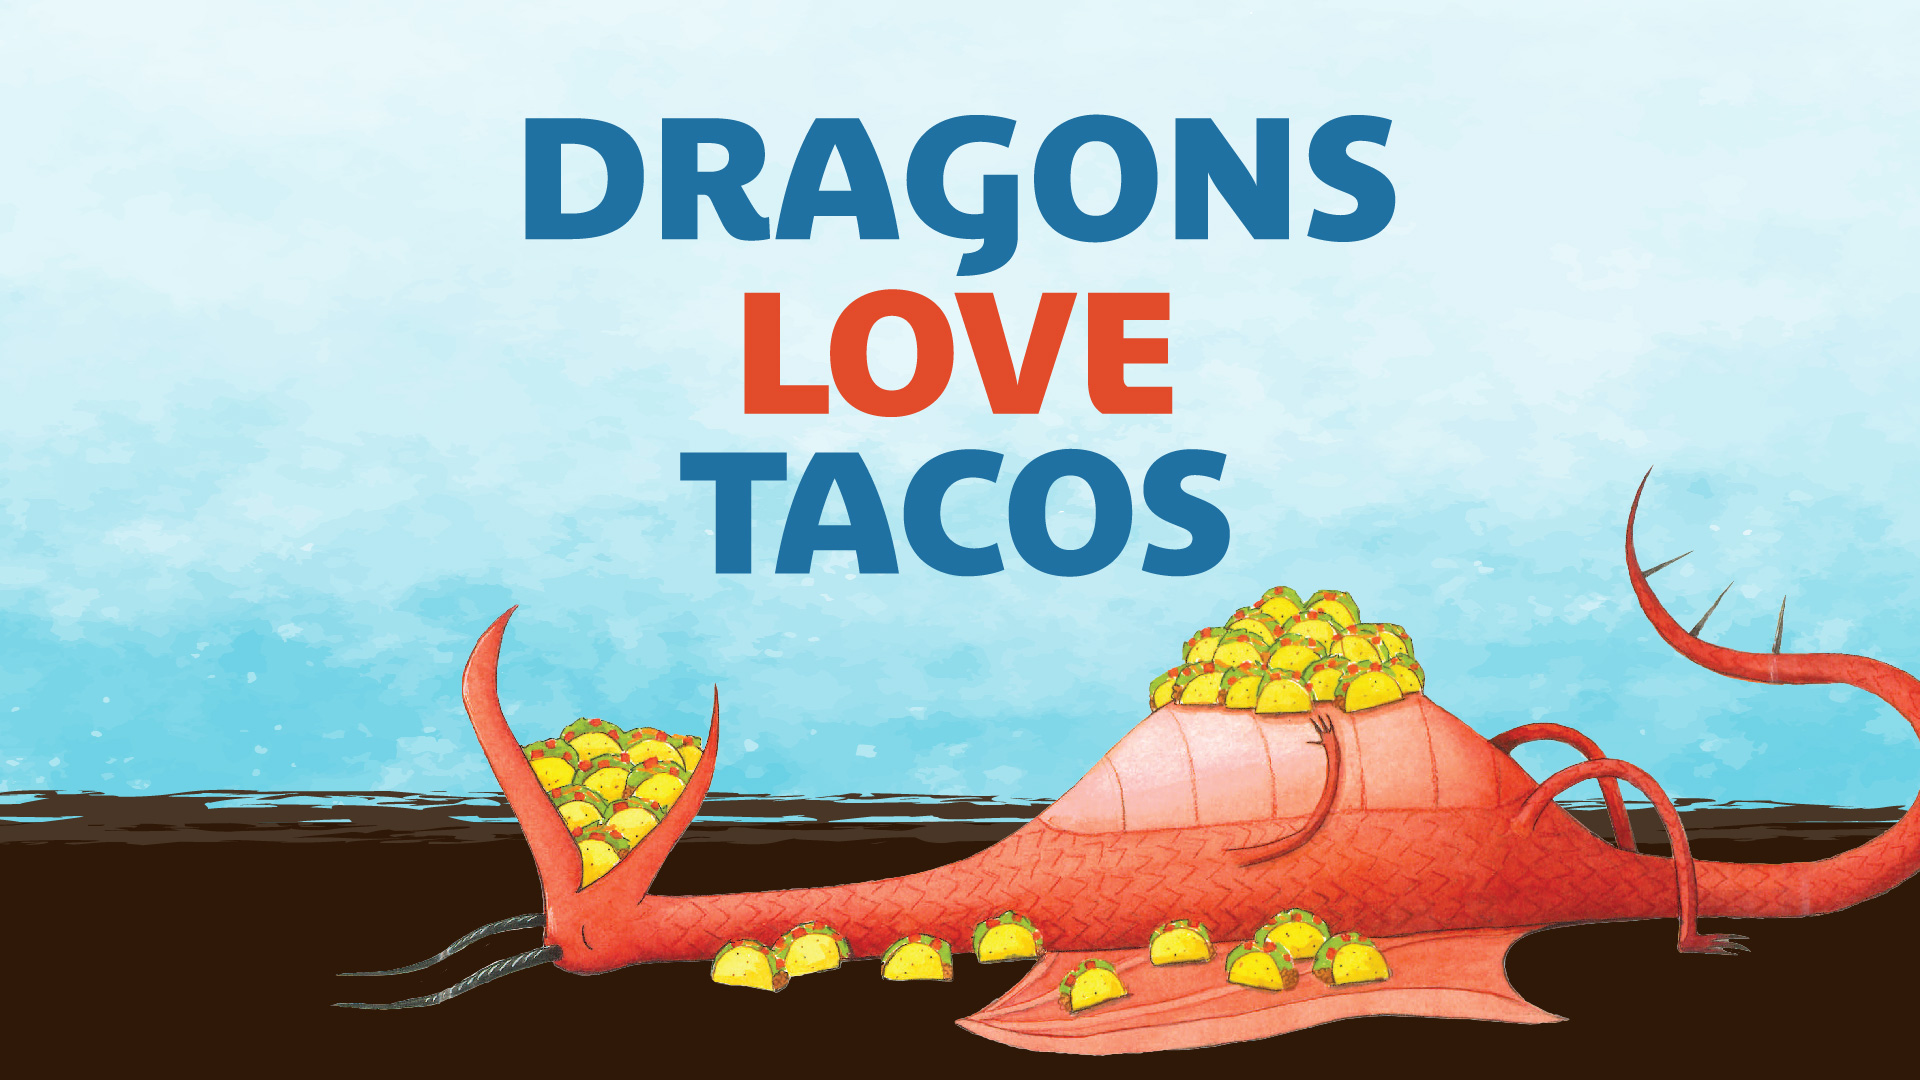 image of dragon eating tacos with text that says dragons love tacos